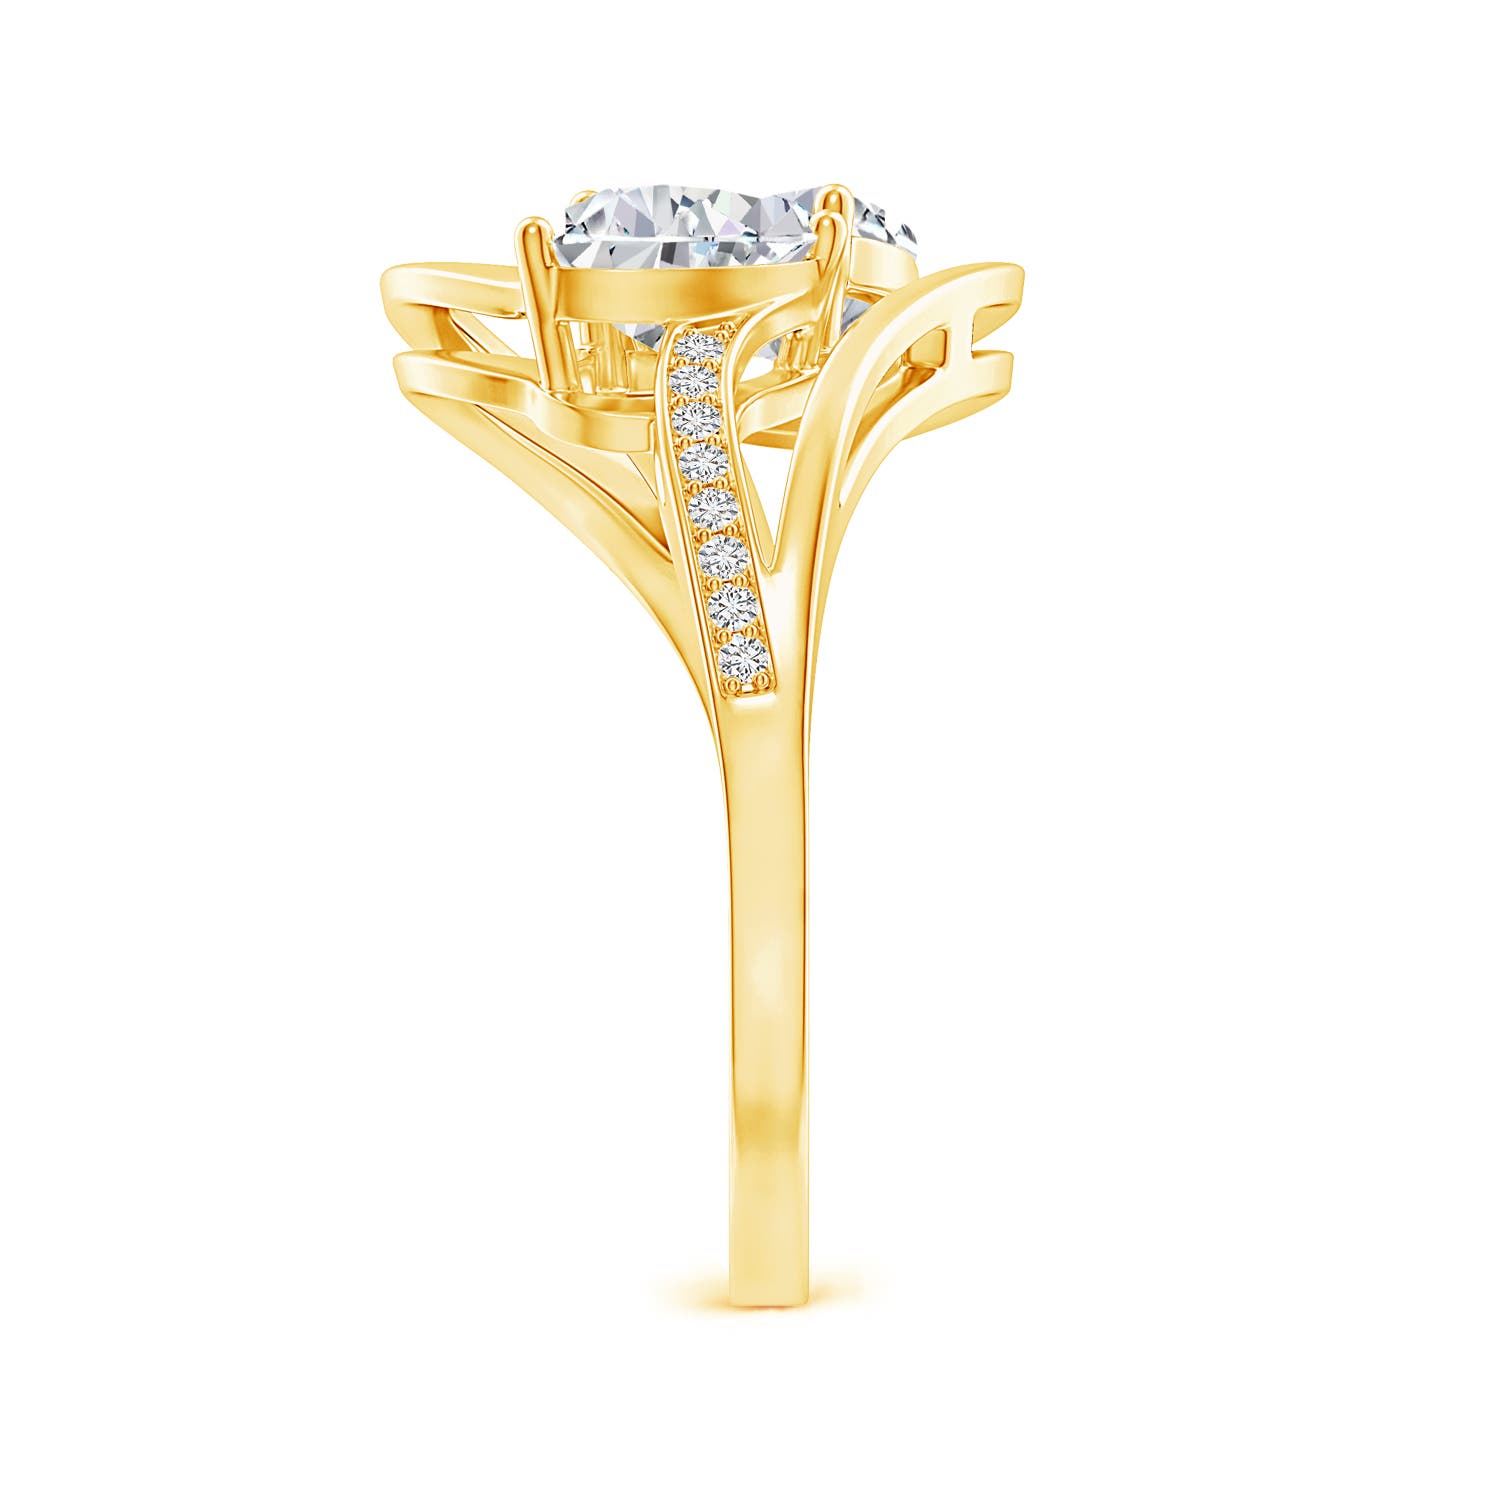 H, SI2 / 1.51 CT / 14 KT Yellow Gold